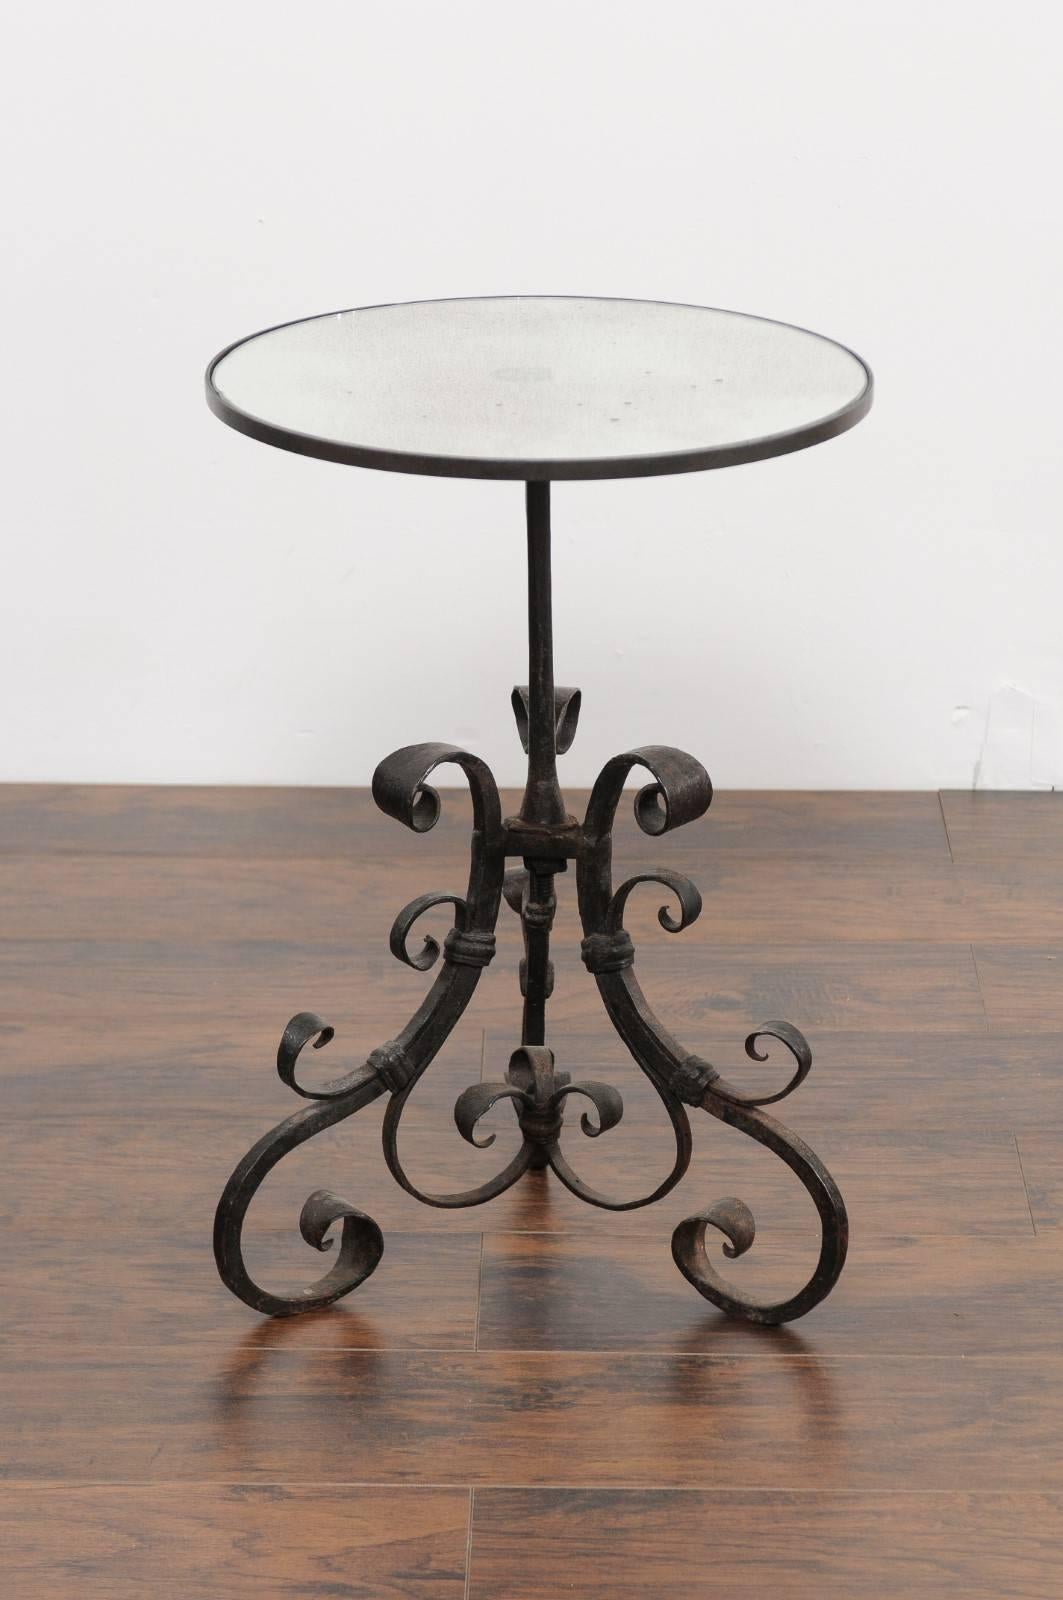 1870s Italian Wrought-Iron Pedestal Side Table with Mirrored Top and Scrolls 3